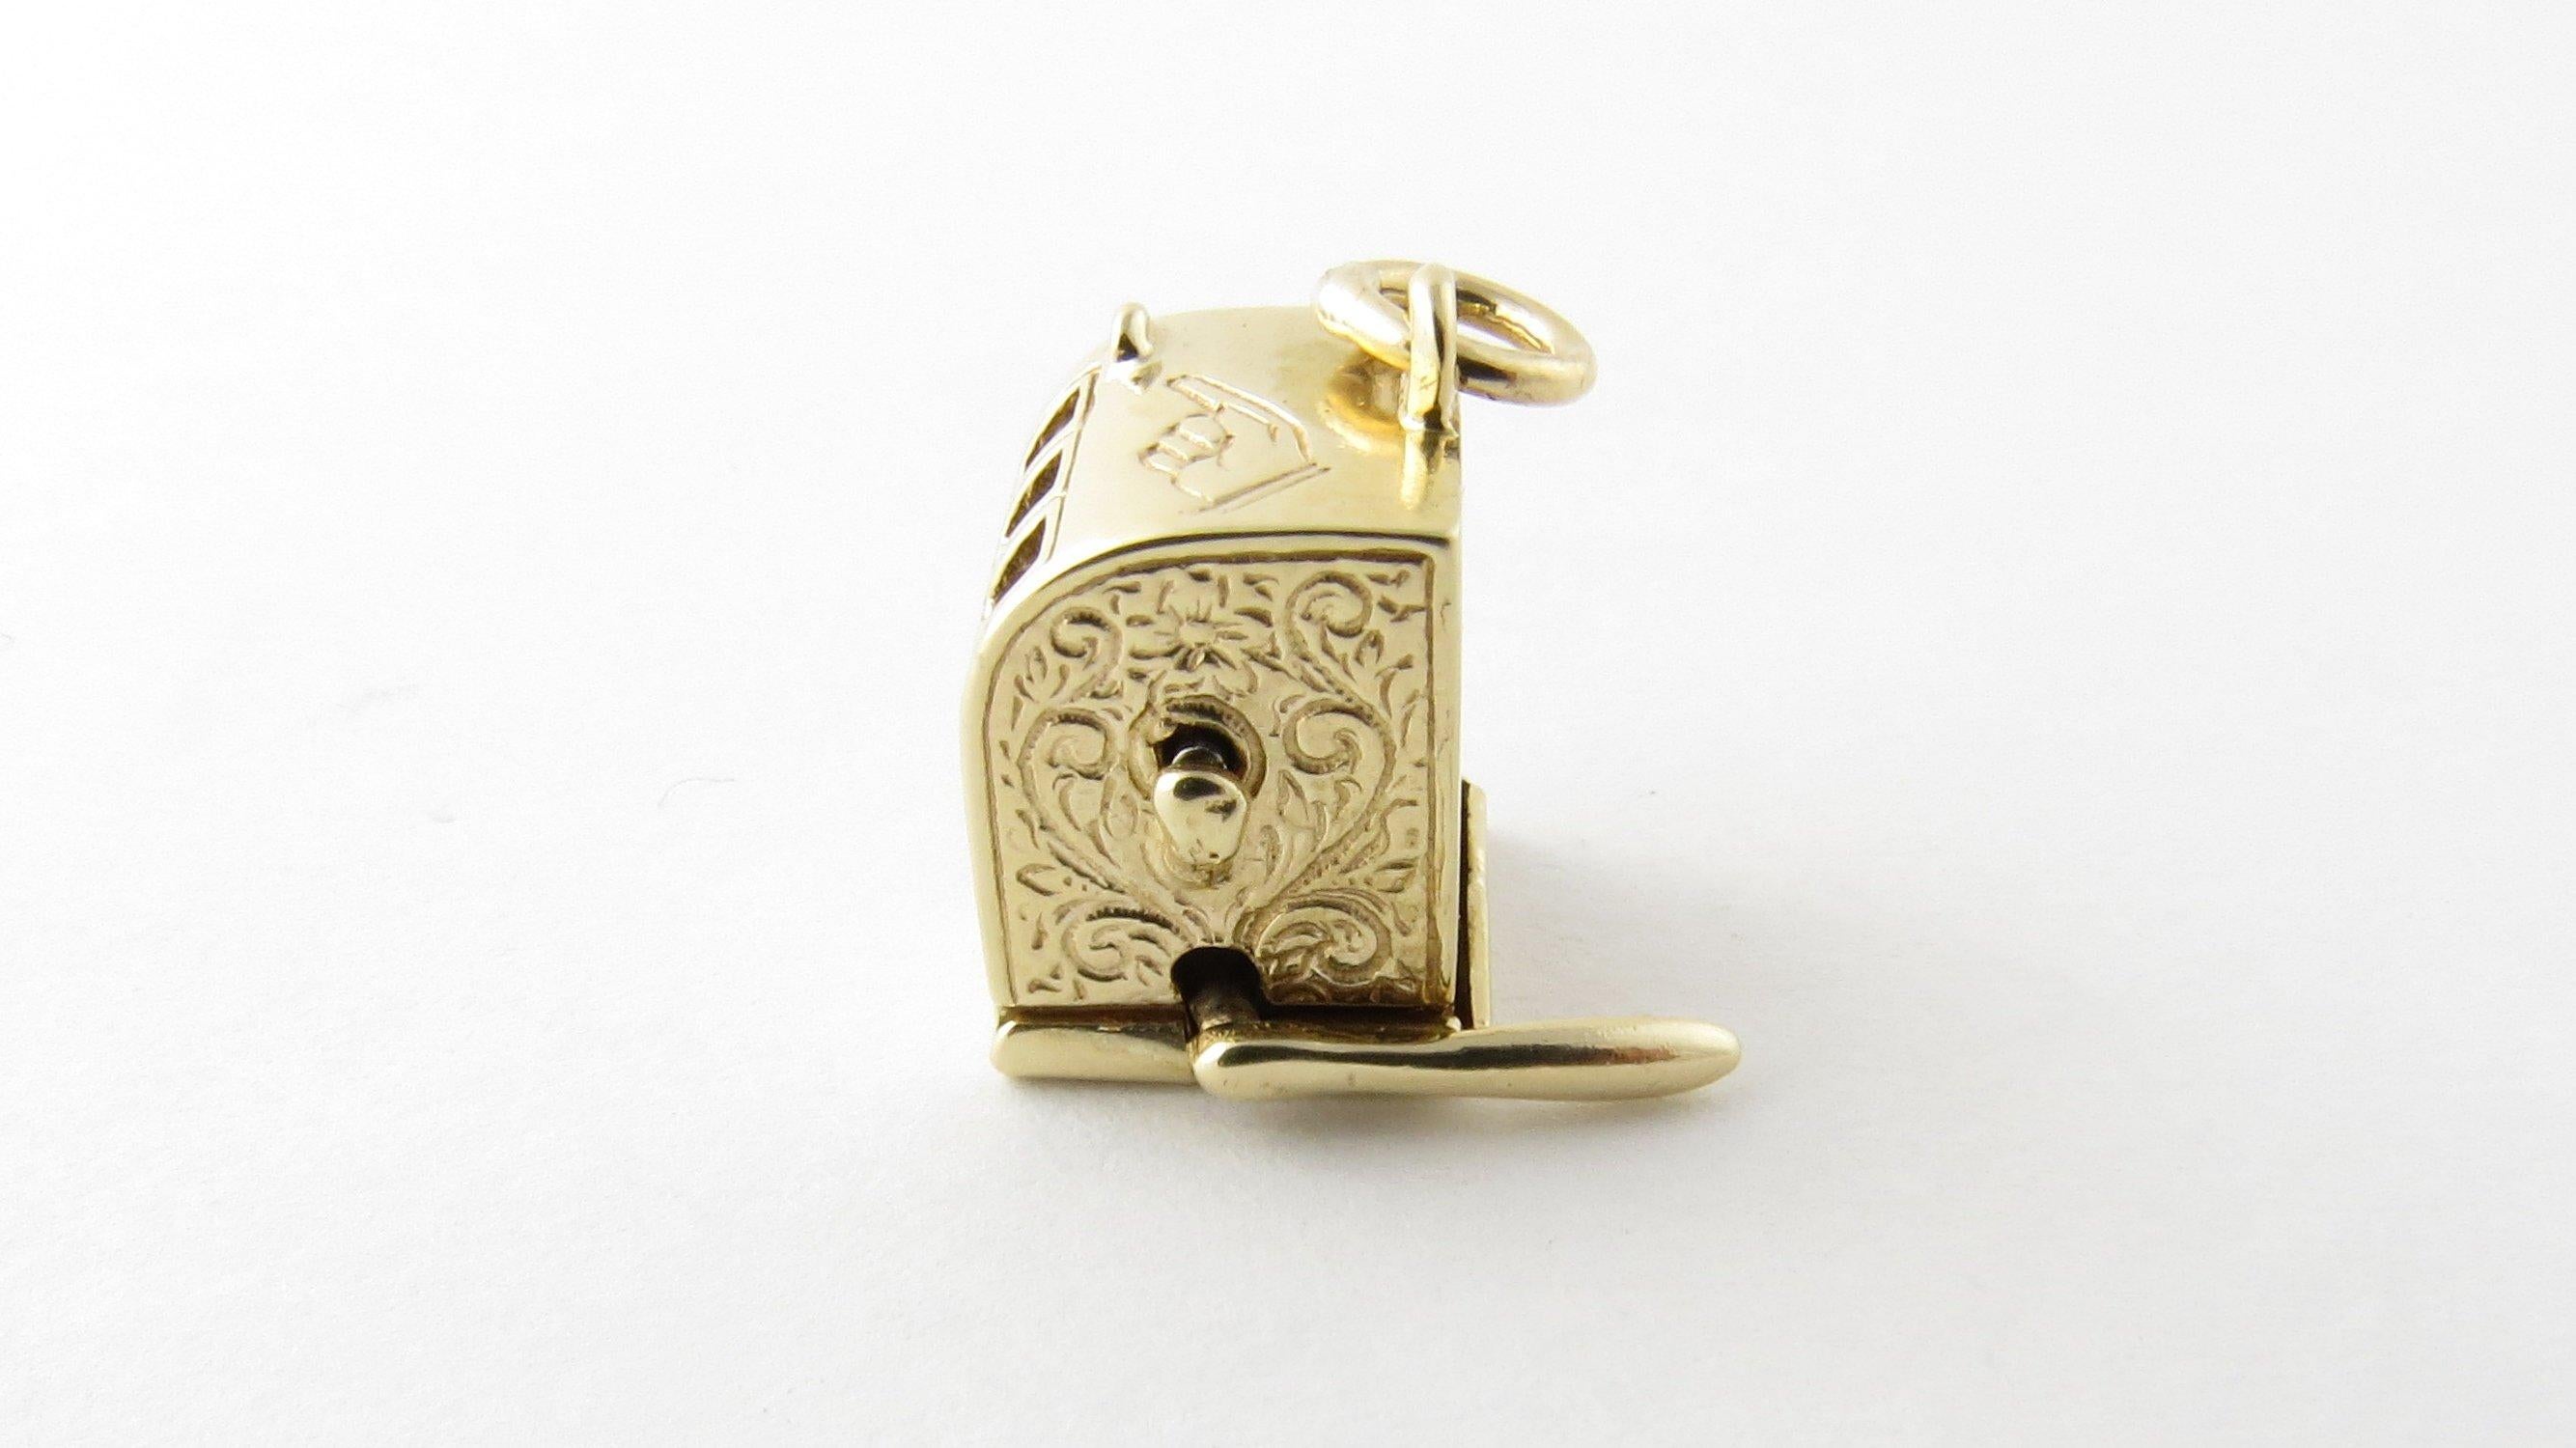 Vintage 14 Karat Yellow Gold Mechanical Slot Machine Charm- 
Try your luck! 
This lovely 3D charm features a miniature slot machine with working lever that spins the three inner wheels to reveal colored fruits! Meticulously detailed in 14K yellow